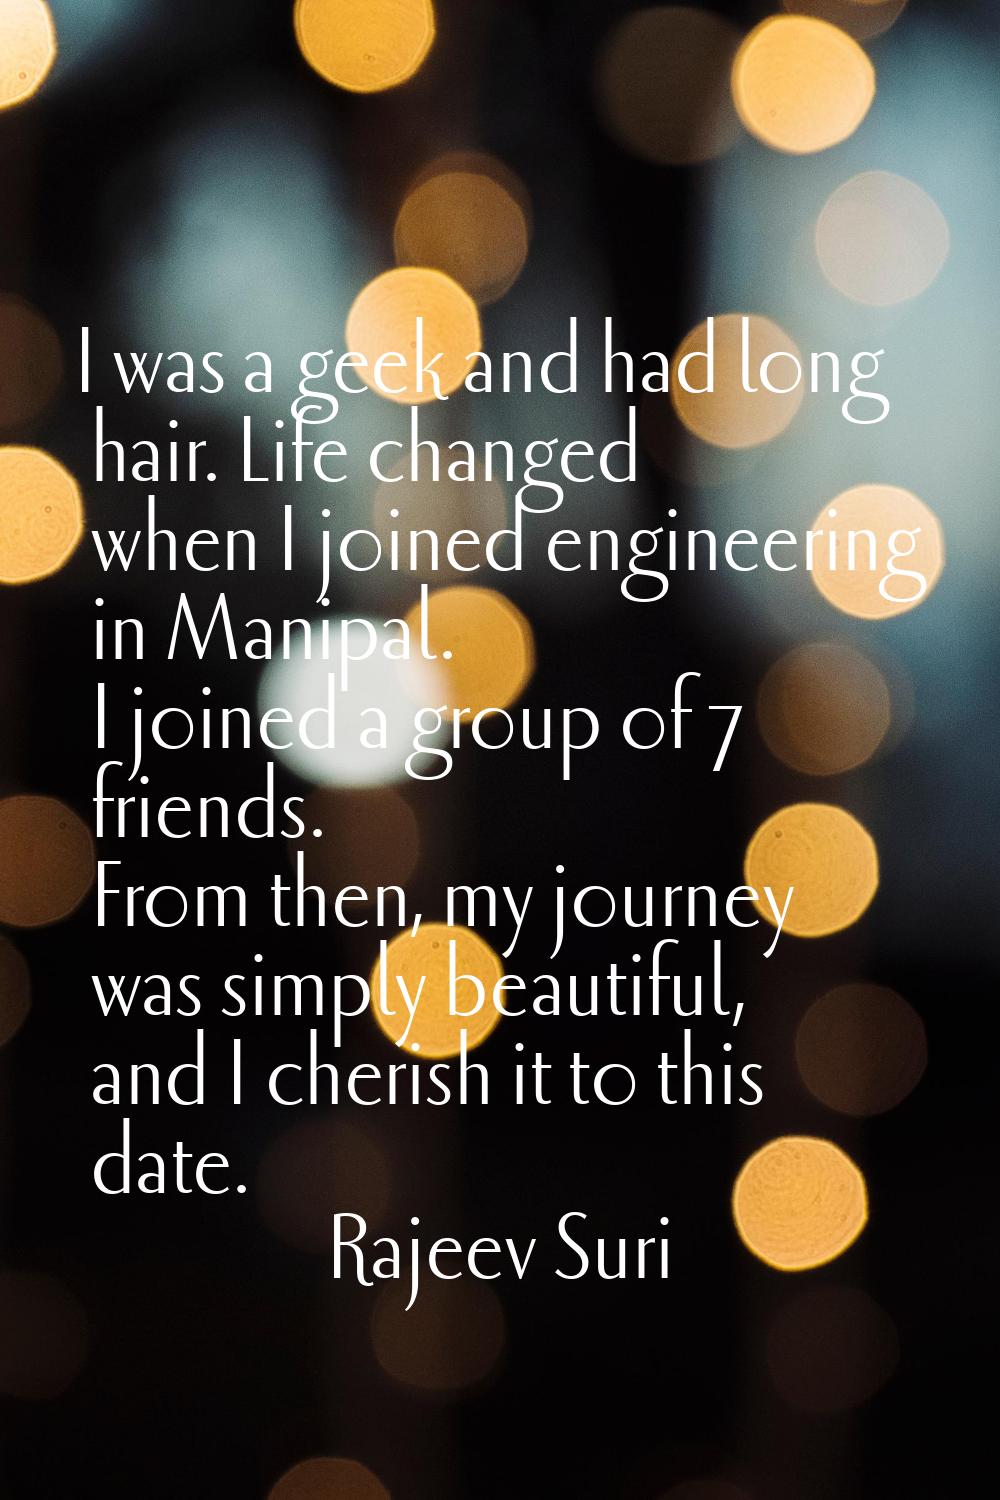 I was a geek and had long hair. Life changed when I joined engineering in Manipal. I joined a group